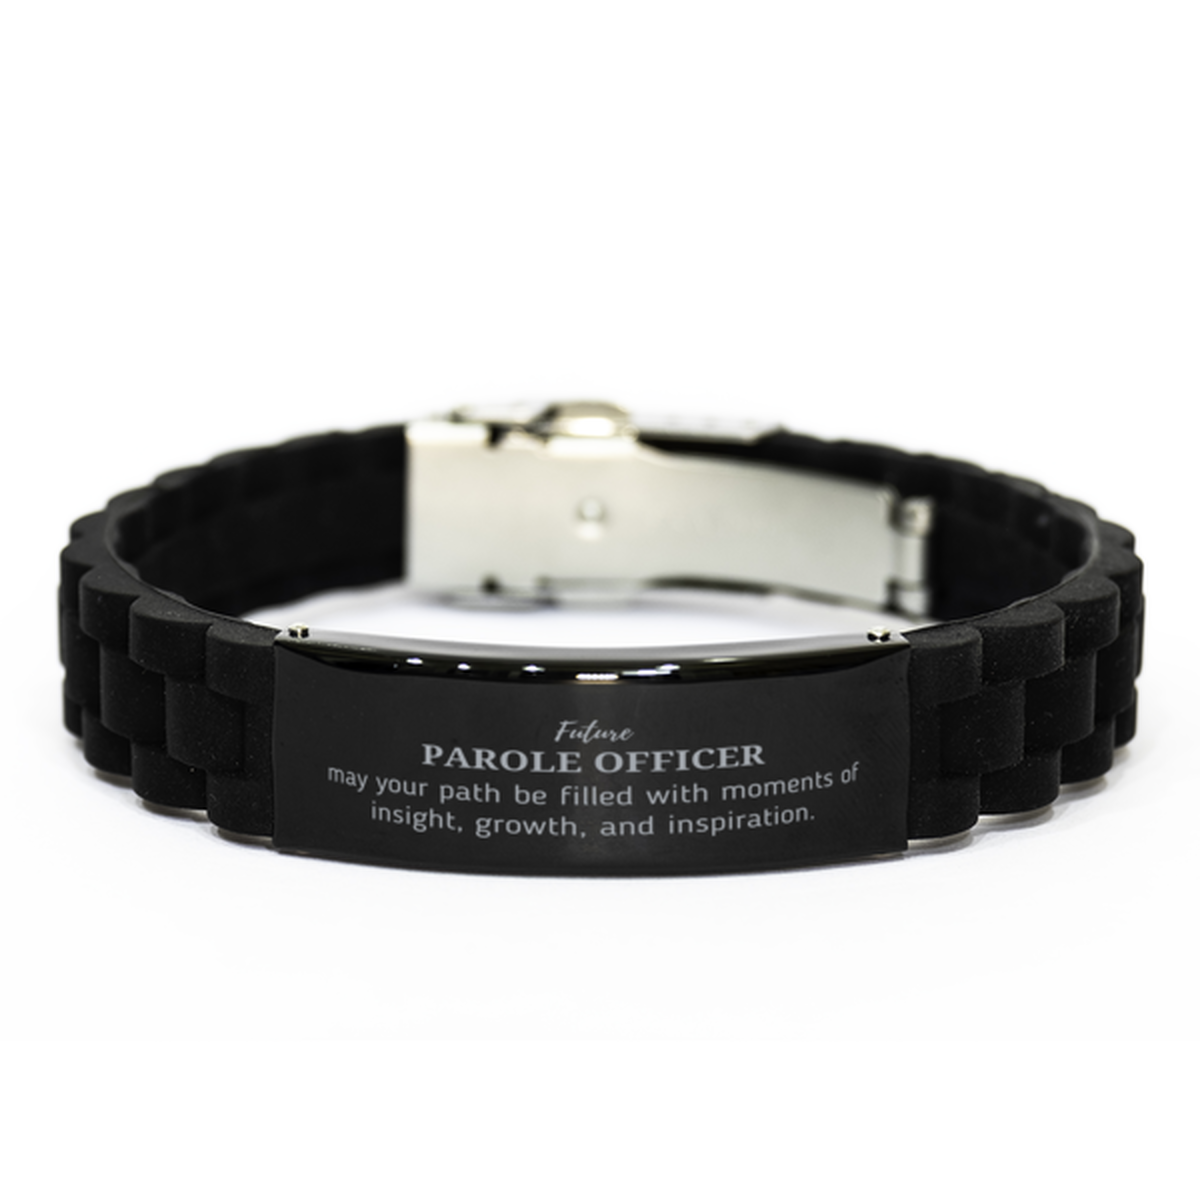 Future Parole Officer Gifts, May your path be filled with moments of insight, Graduation Gifts for New Parole Officer, Christmas Unique Black Glidelock Clasp Bracelet For Men, Women, Friends